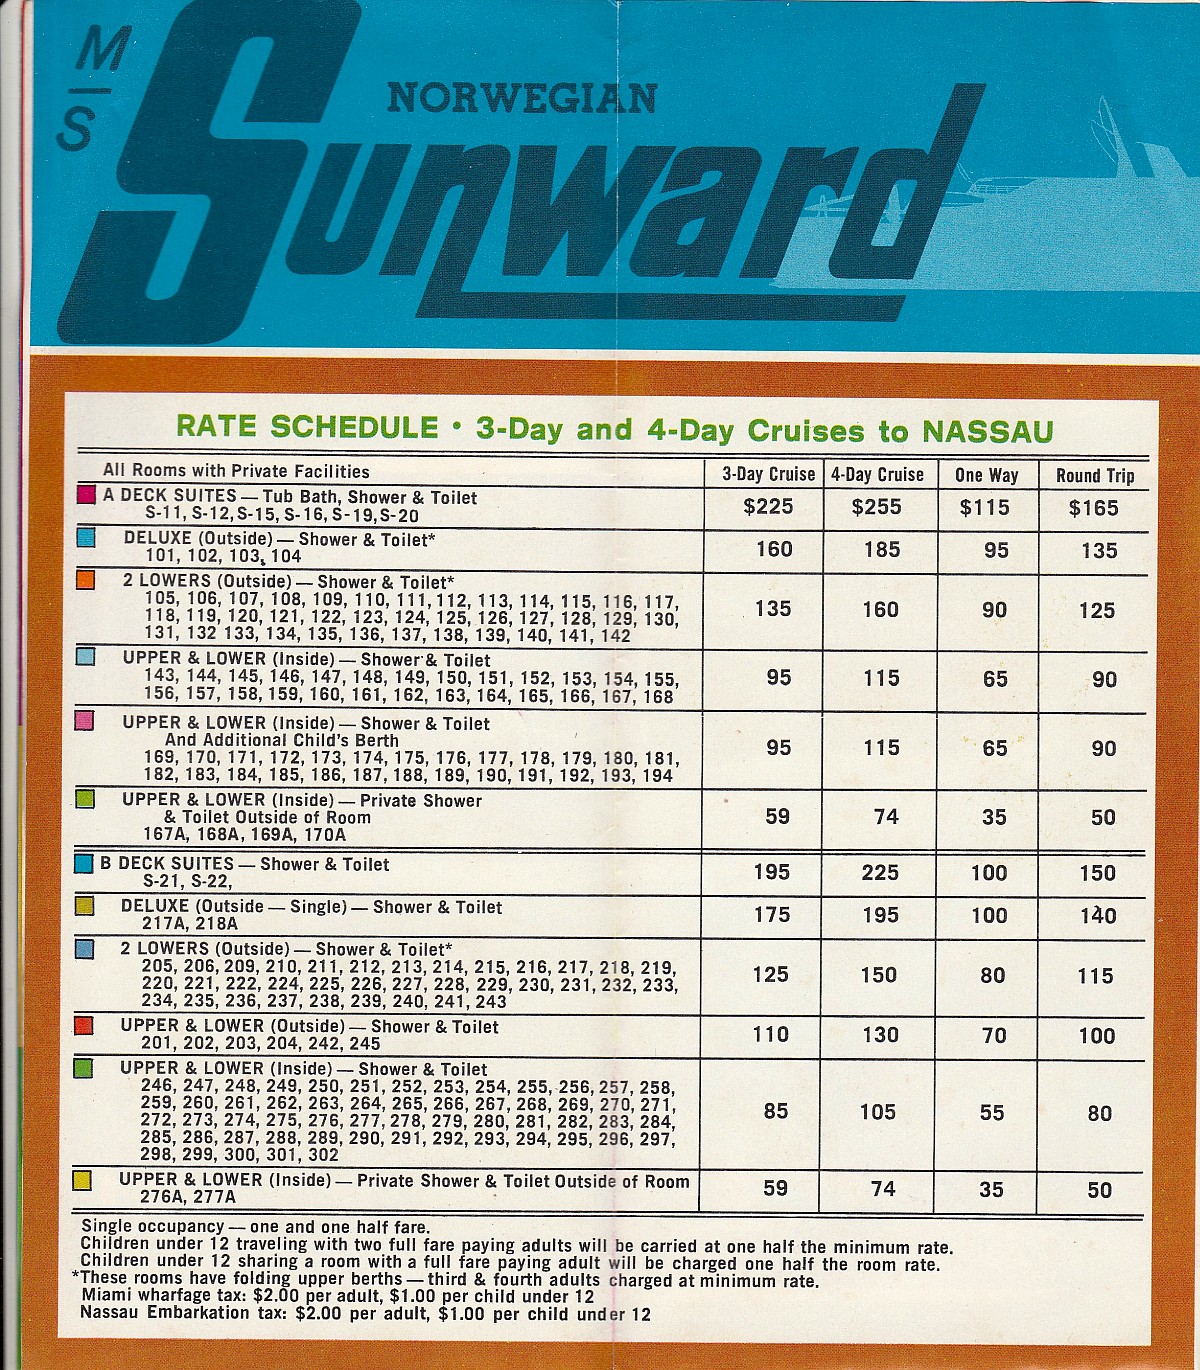 ms Sunward Rate schedule: 3-day and 4-day cruises to Nassau